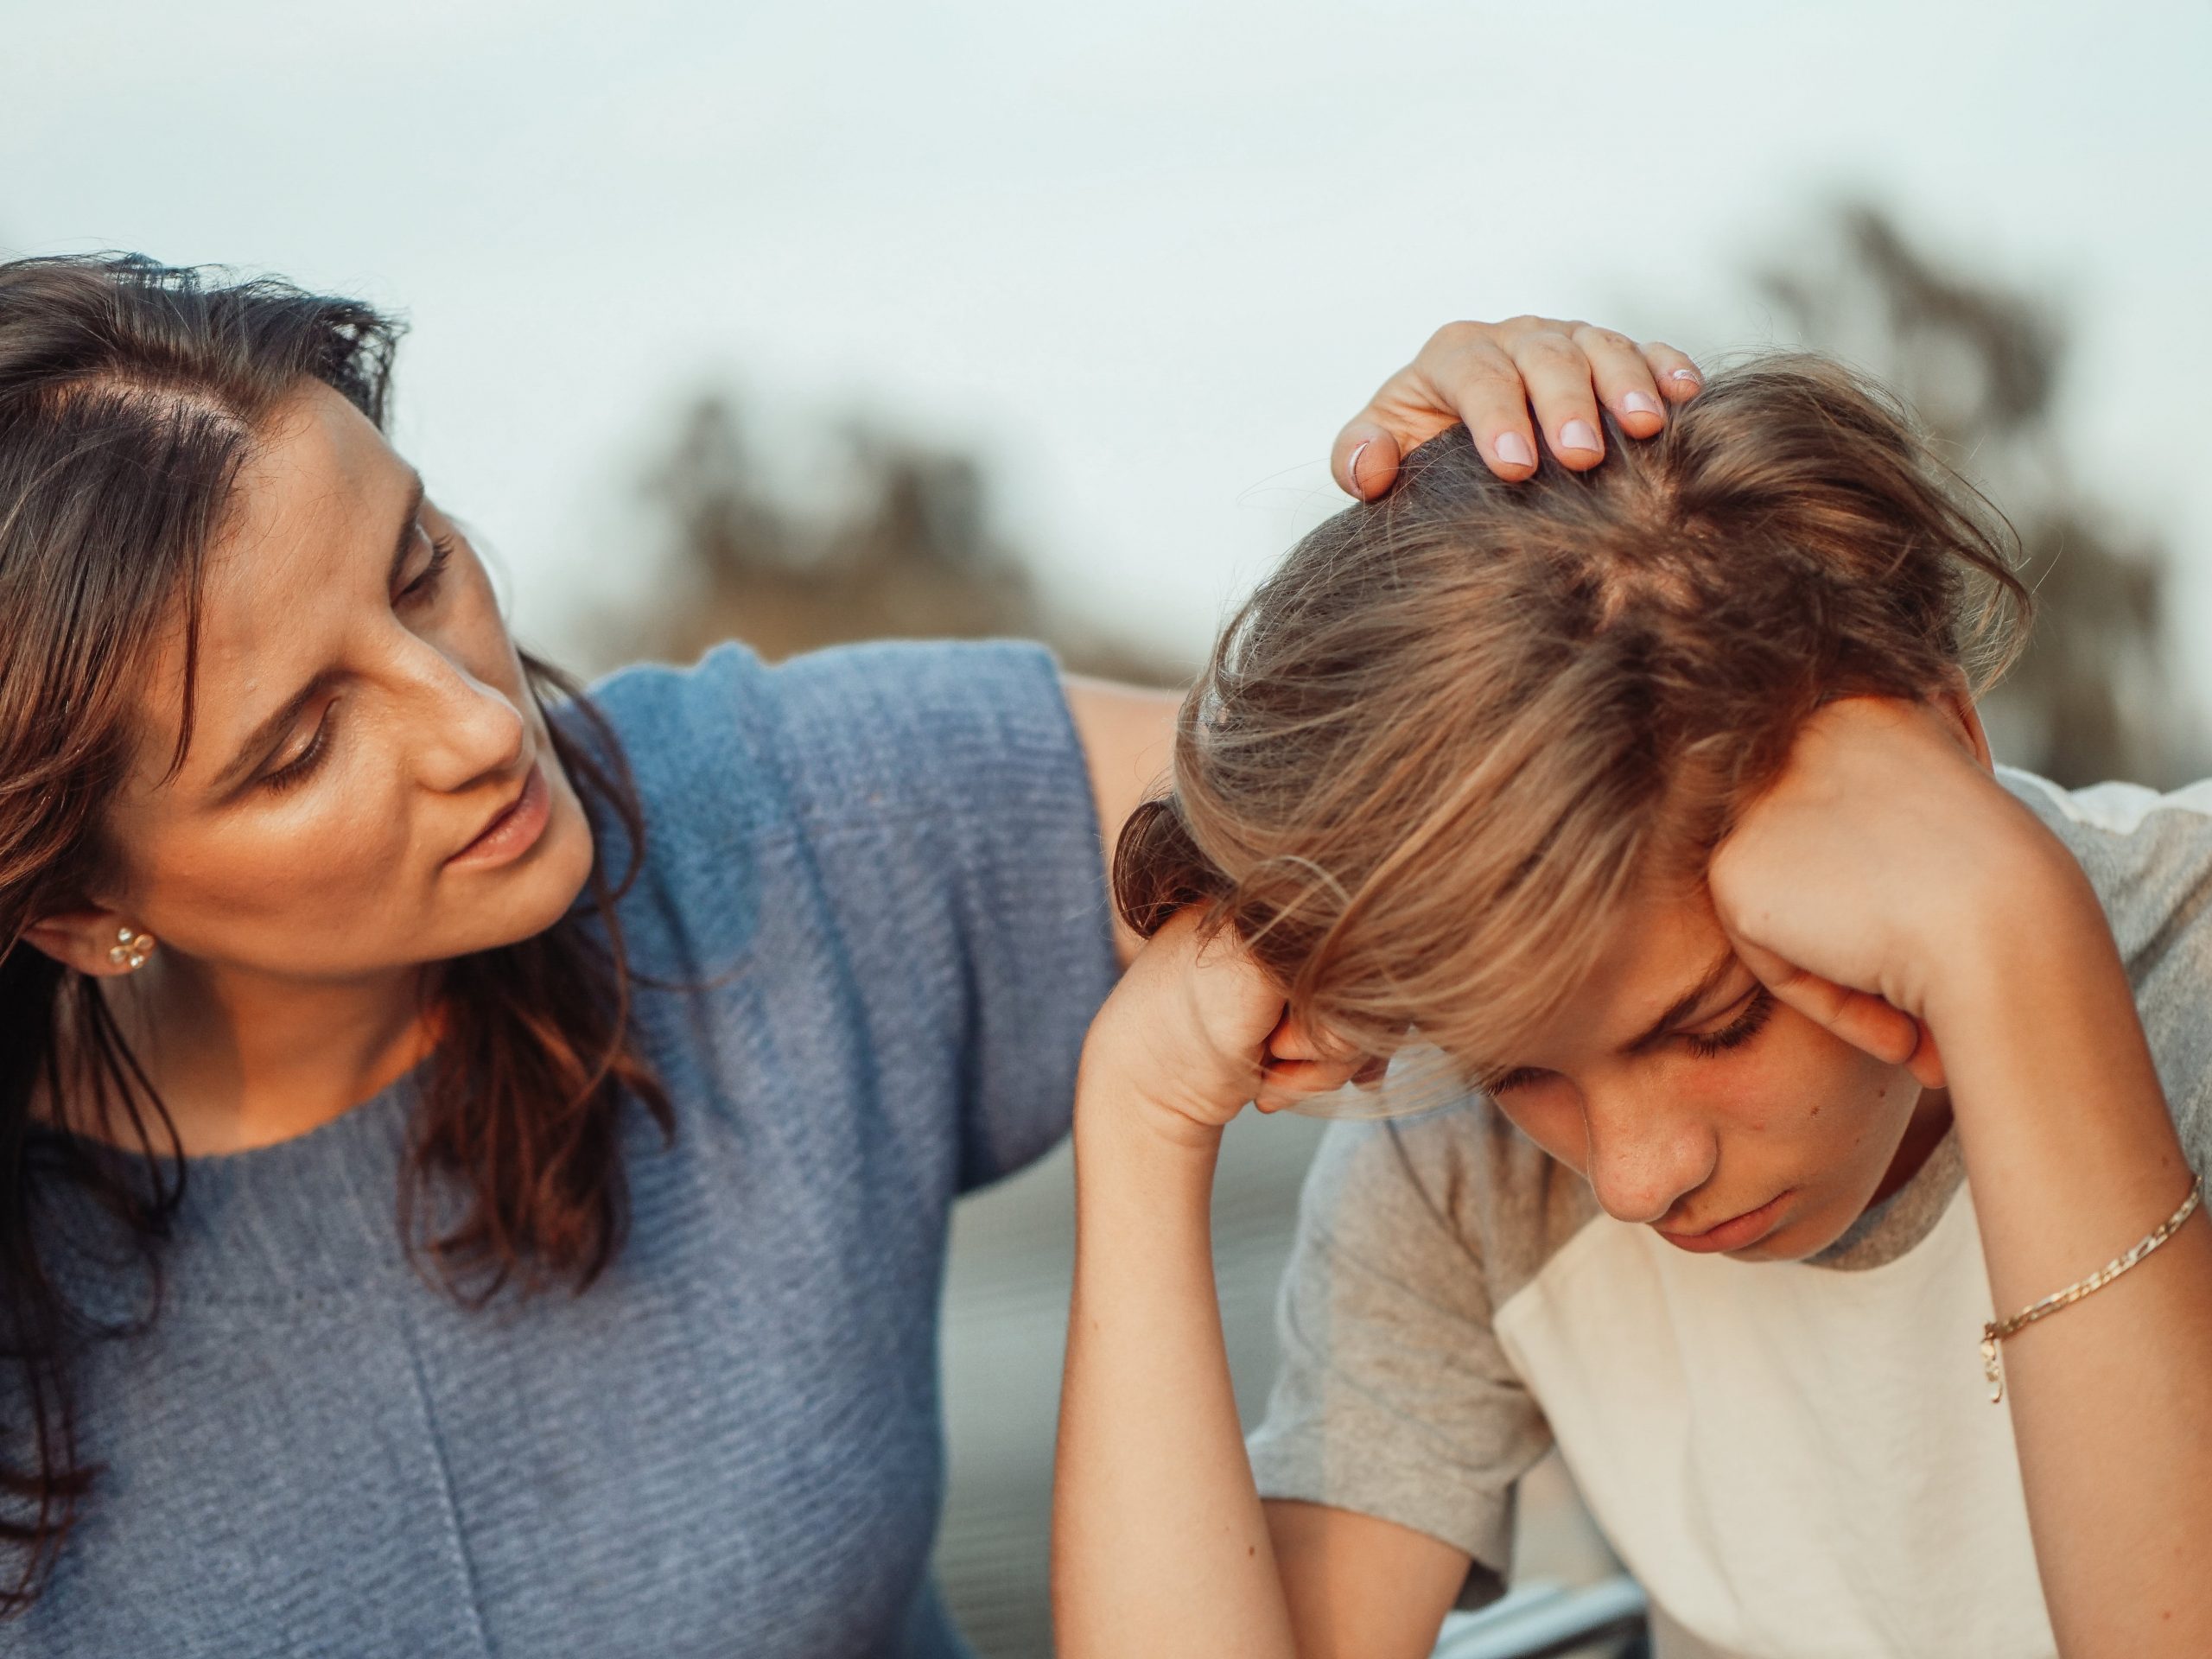 A woman comforting a distressed young boy outdoors, both showing expressions of concern and sadness.